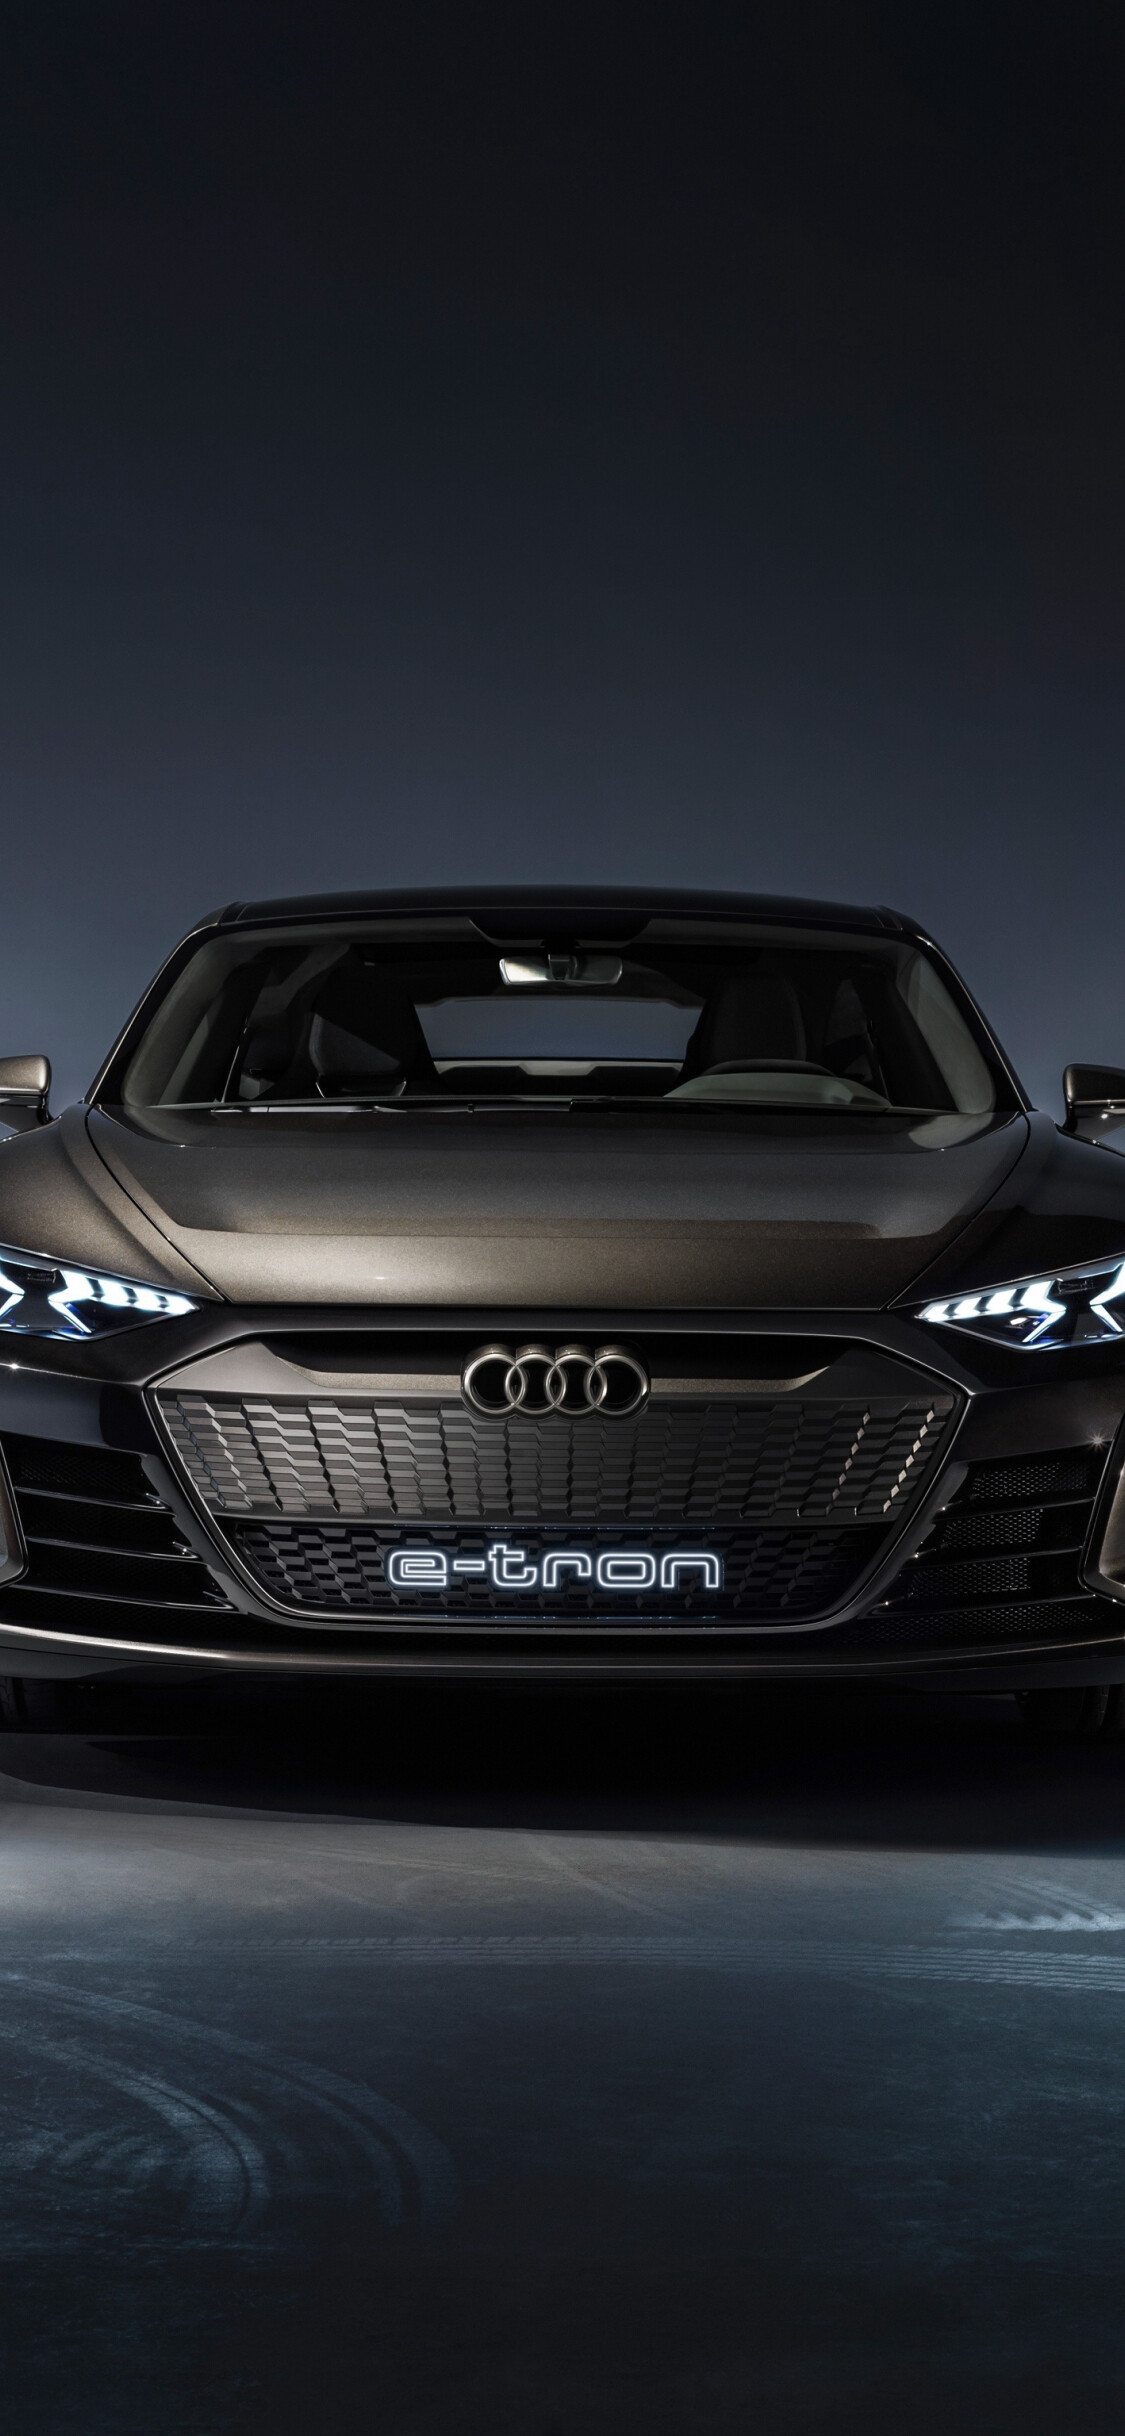 Audi: One of today's most successful luxury car brands, Fully electric models, The E-Tron. 1130x2440 HD Wallpaper.